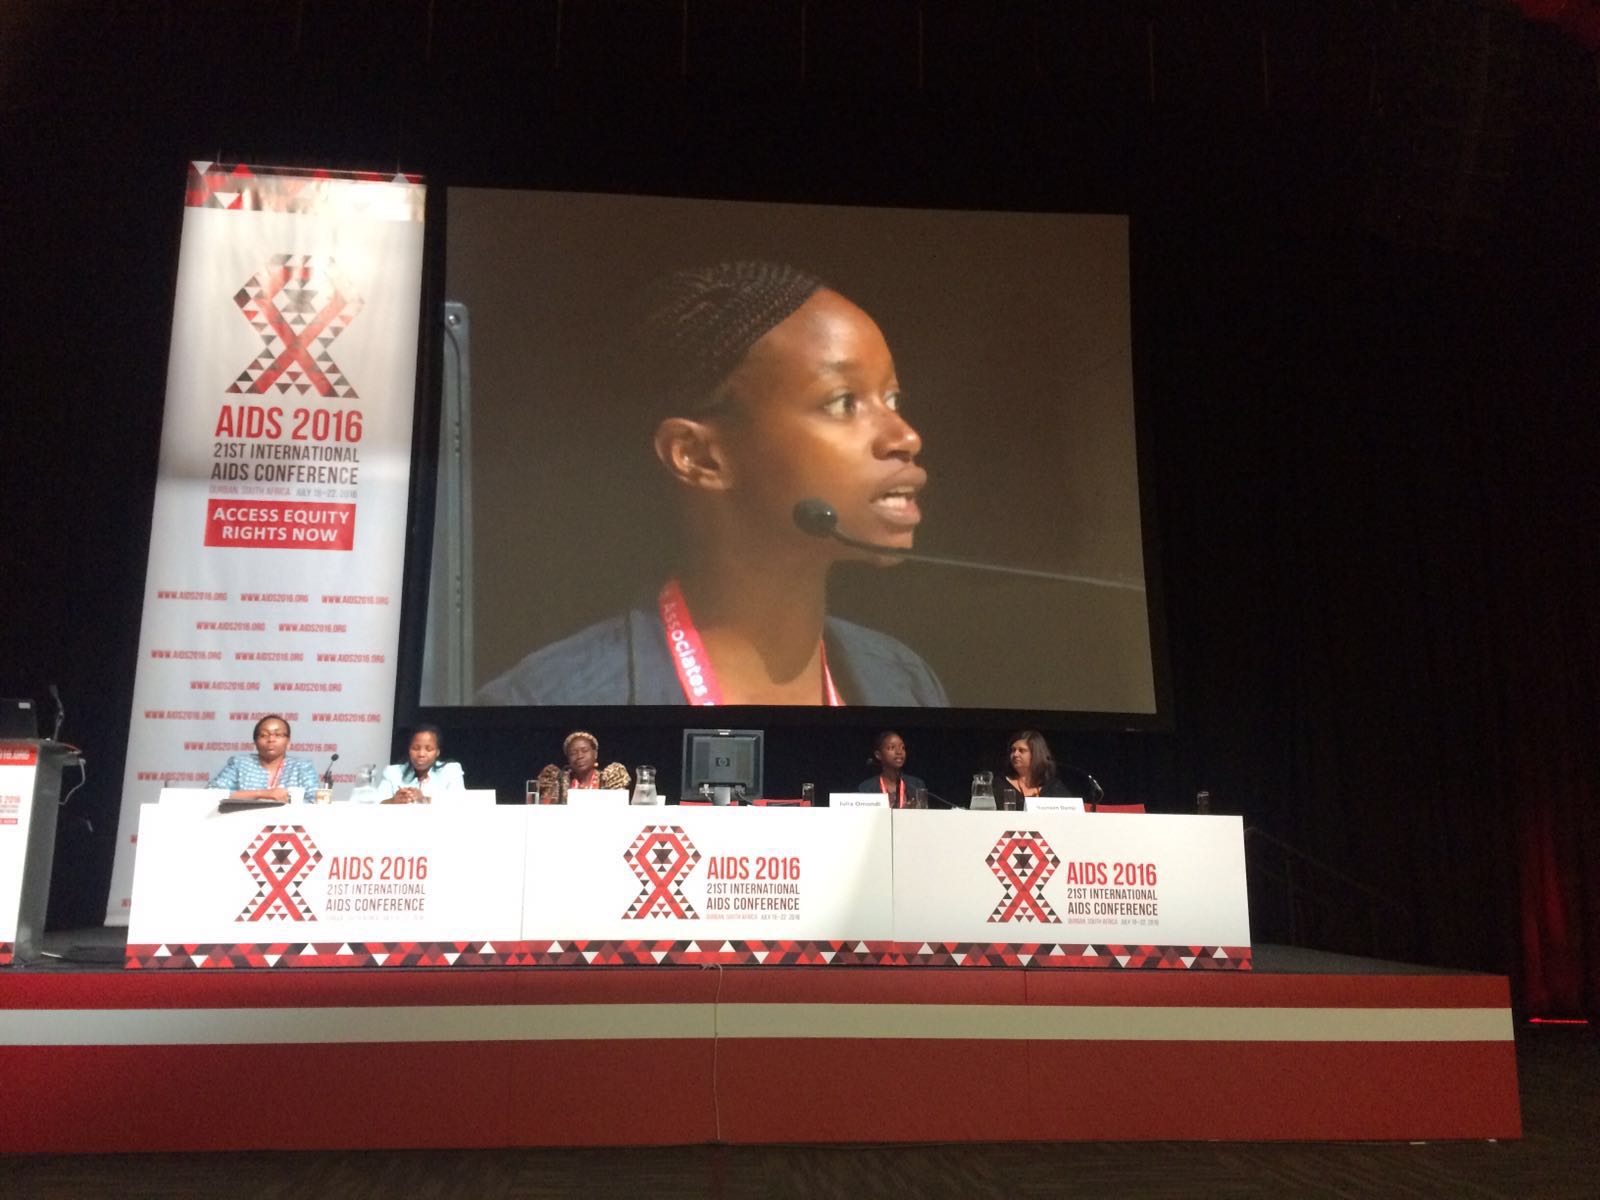 Panelists at the conference during sessions on GBV and HIV